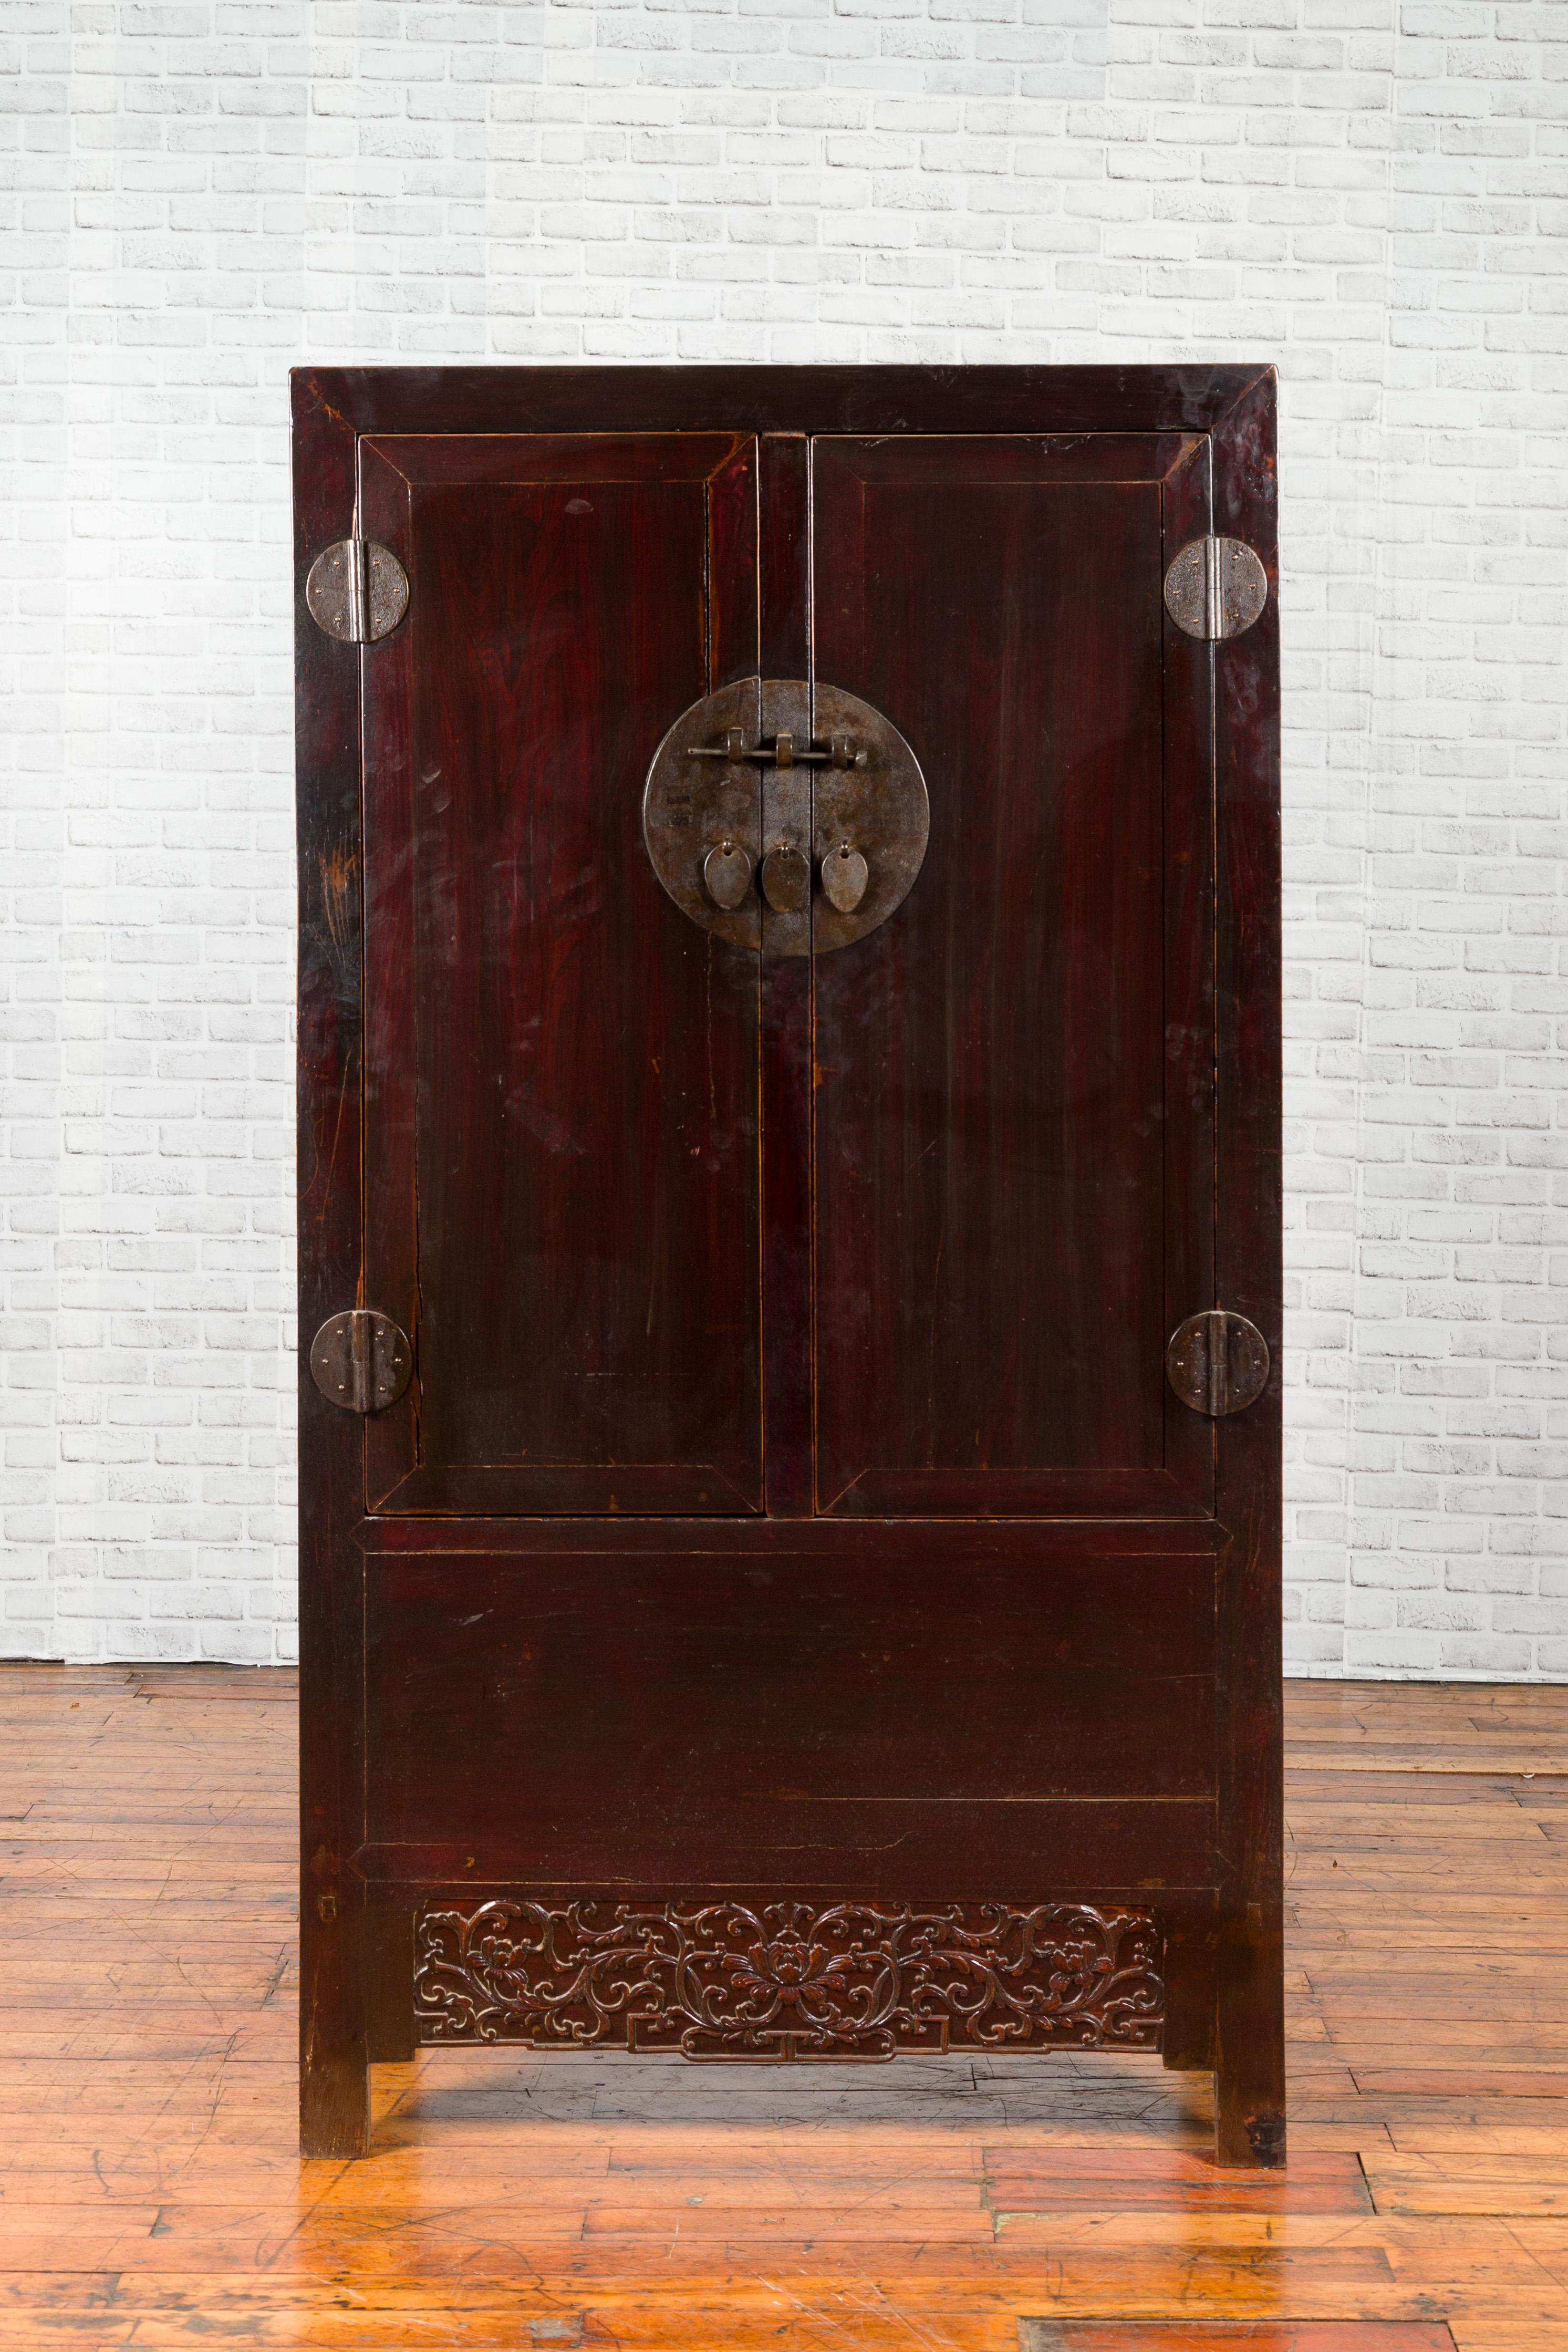 A Chinese Qing dynasty period dark brown lacquered cabinet from the 19th century, with carved scrolling foliage and medallion hardware. Created in China during the Qing dynasty, this cabinet features a linear silhouette perfectly complimenting the